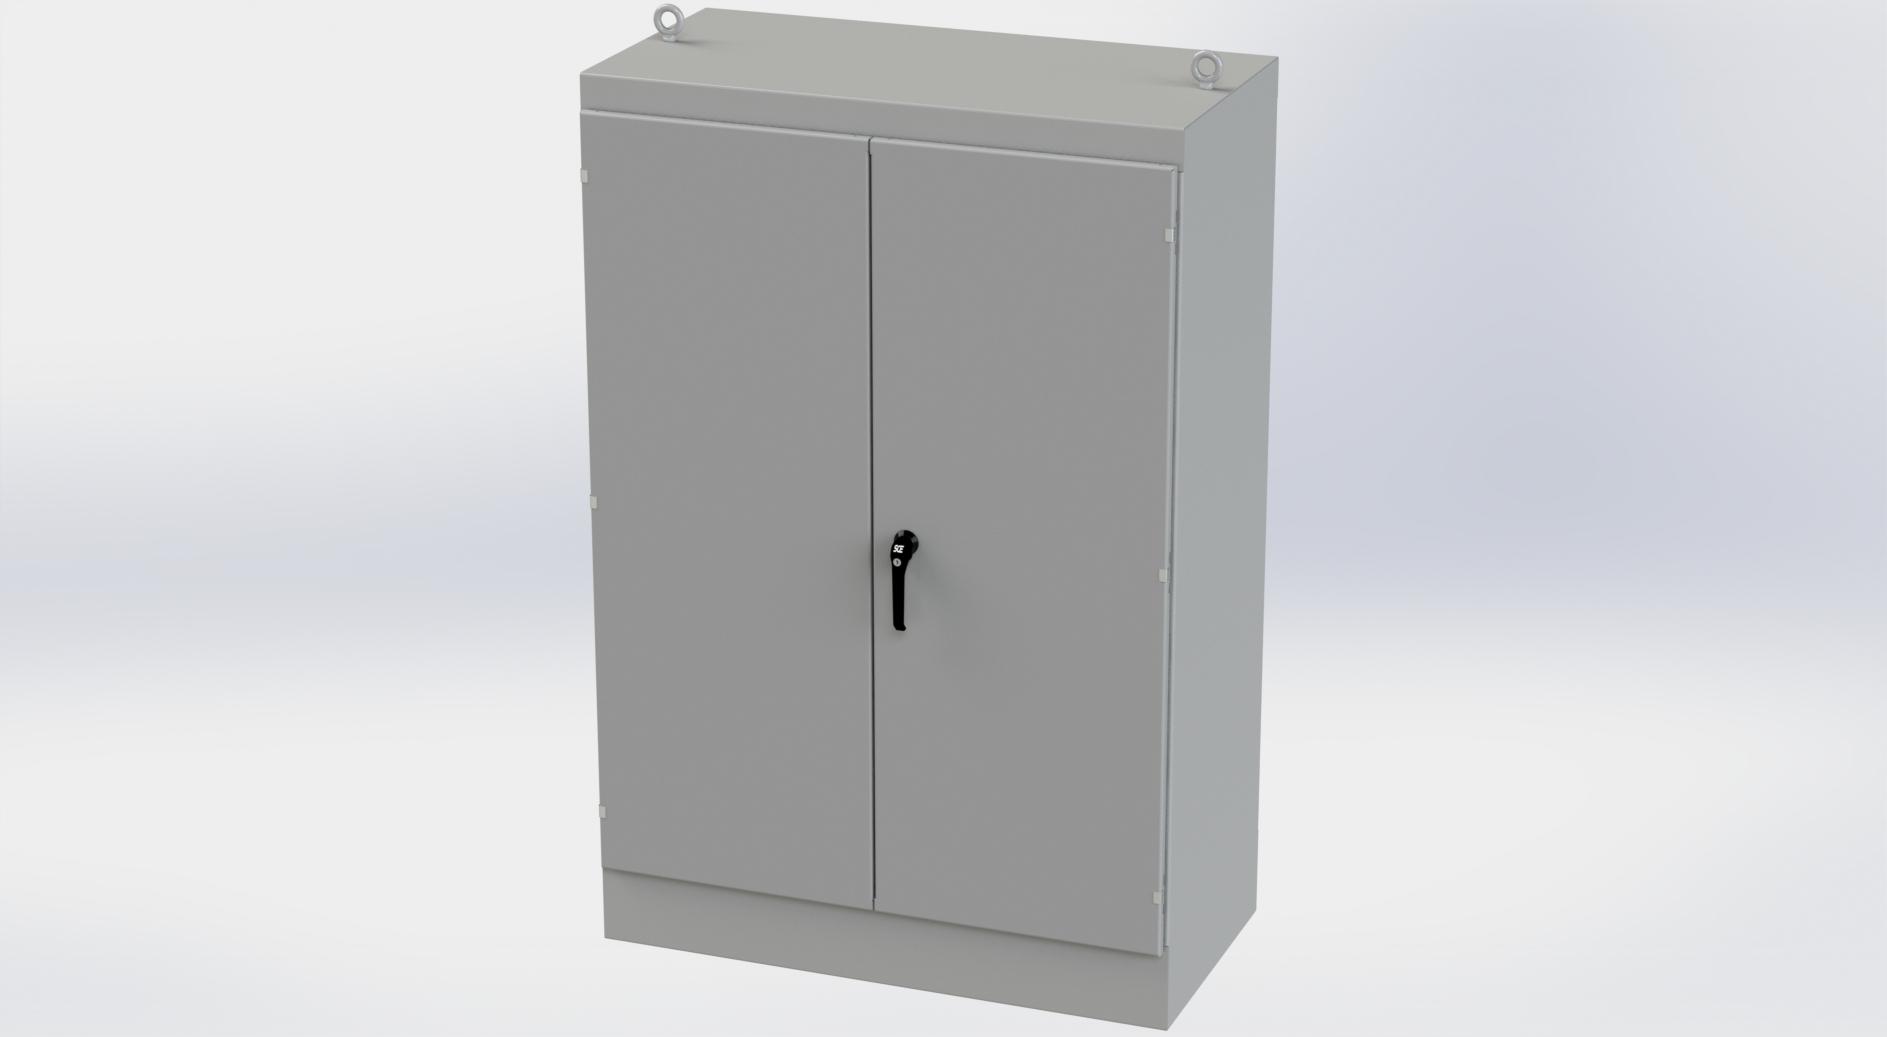 Saginaw Control SCE-724824FSDAD FSDAD Enclosure, Height:72.00", Width:48.00", Depth:24.00", ANSI-61 gray finish inside and out. Optional sub-panels are powder coated white.